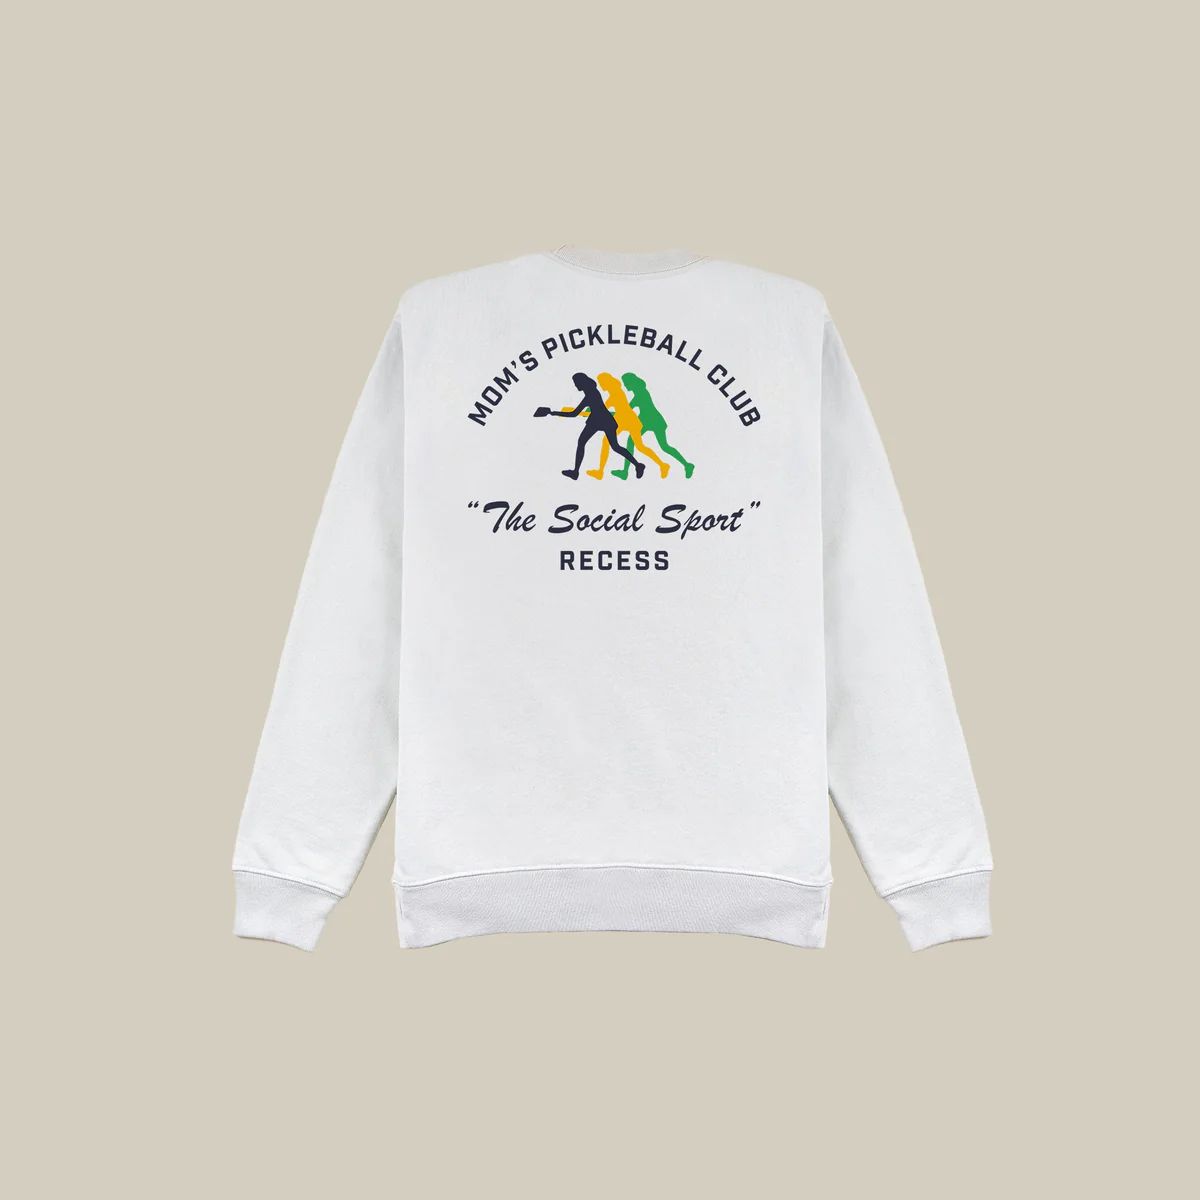 Limited Edition Crewneck: Perfect Mother's Day Gift | Recess | Recess Pickleball